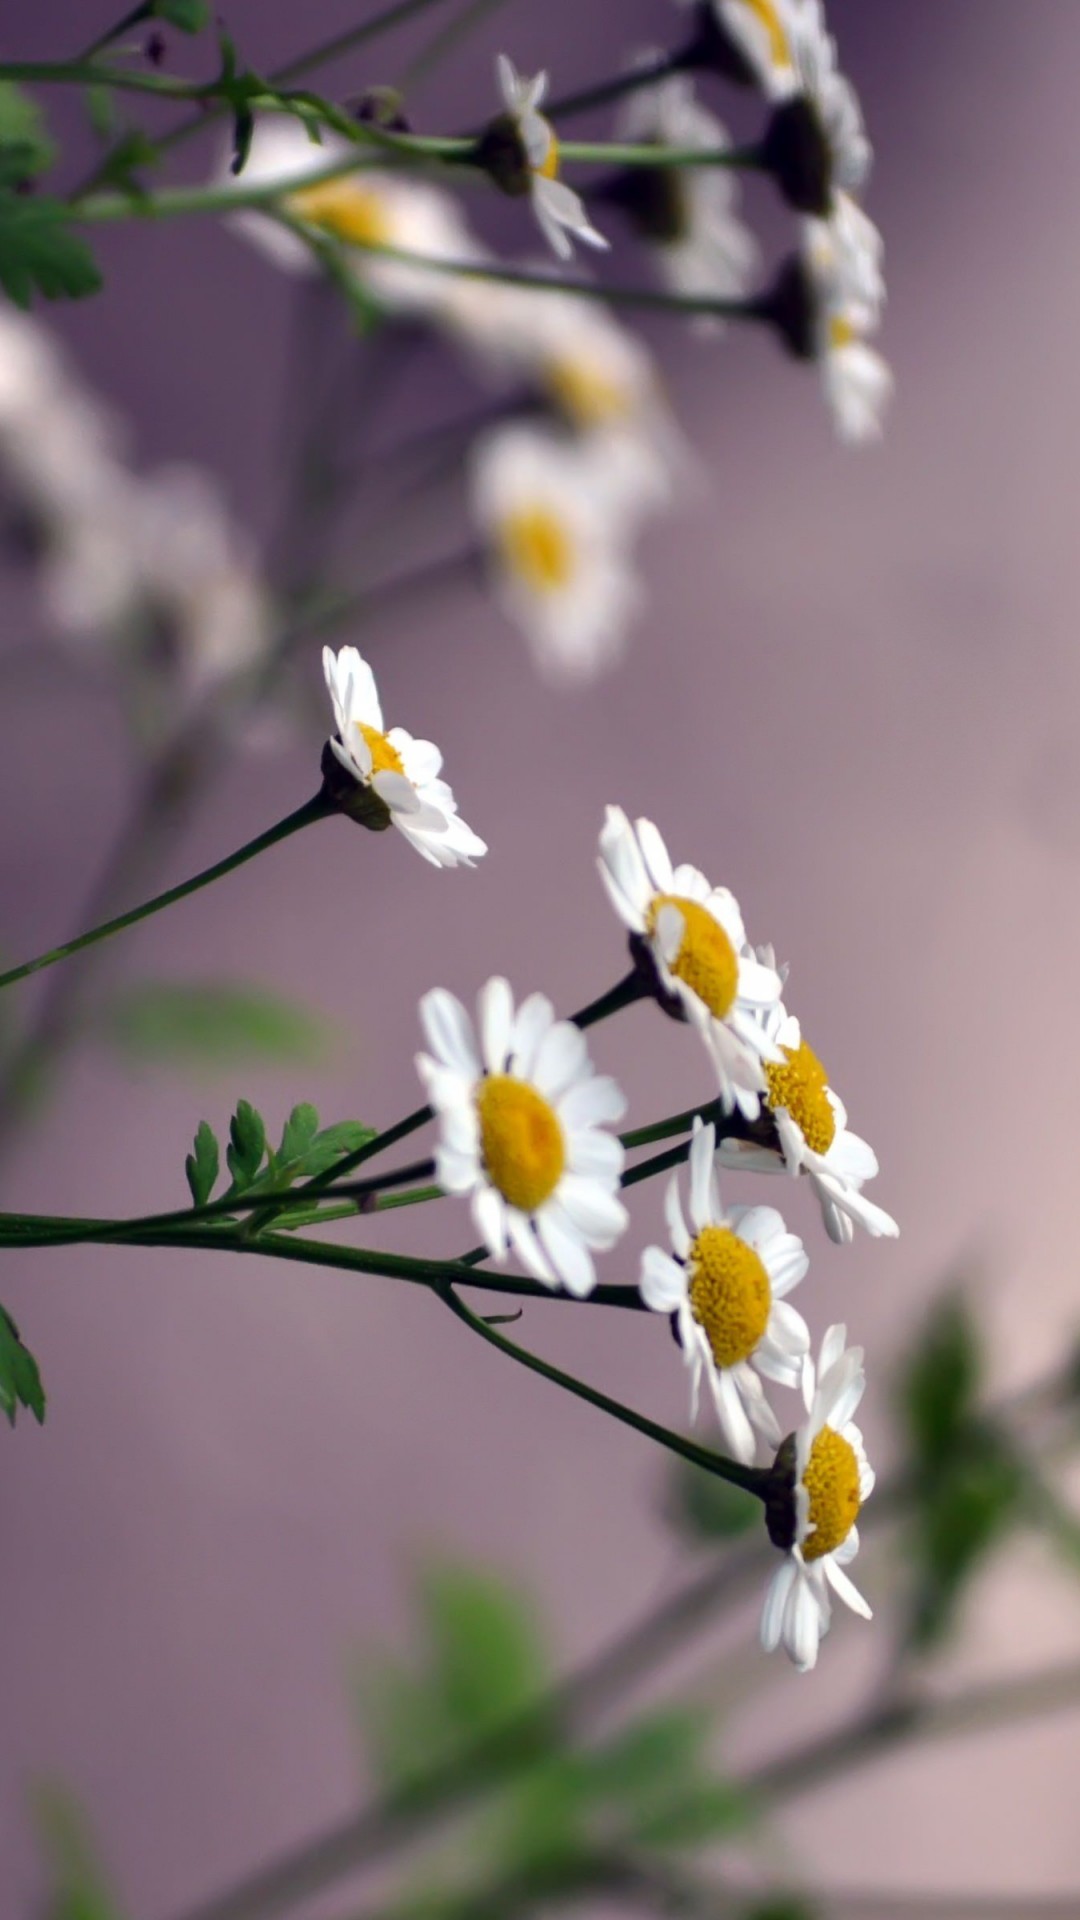 Daisy Flowers Wallpaper for SAMSUNG Galaxy Note 3